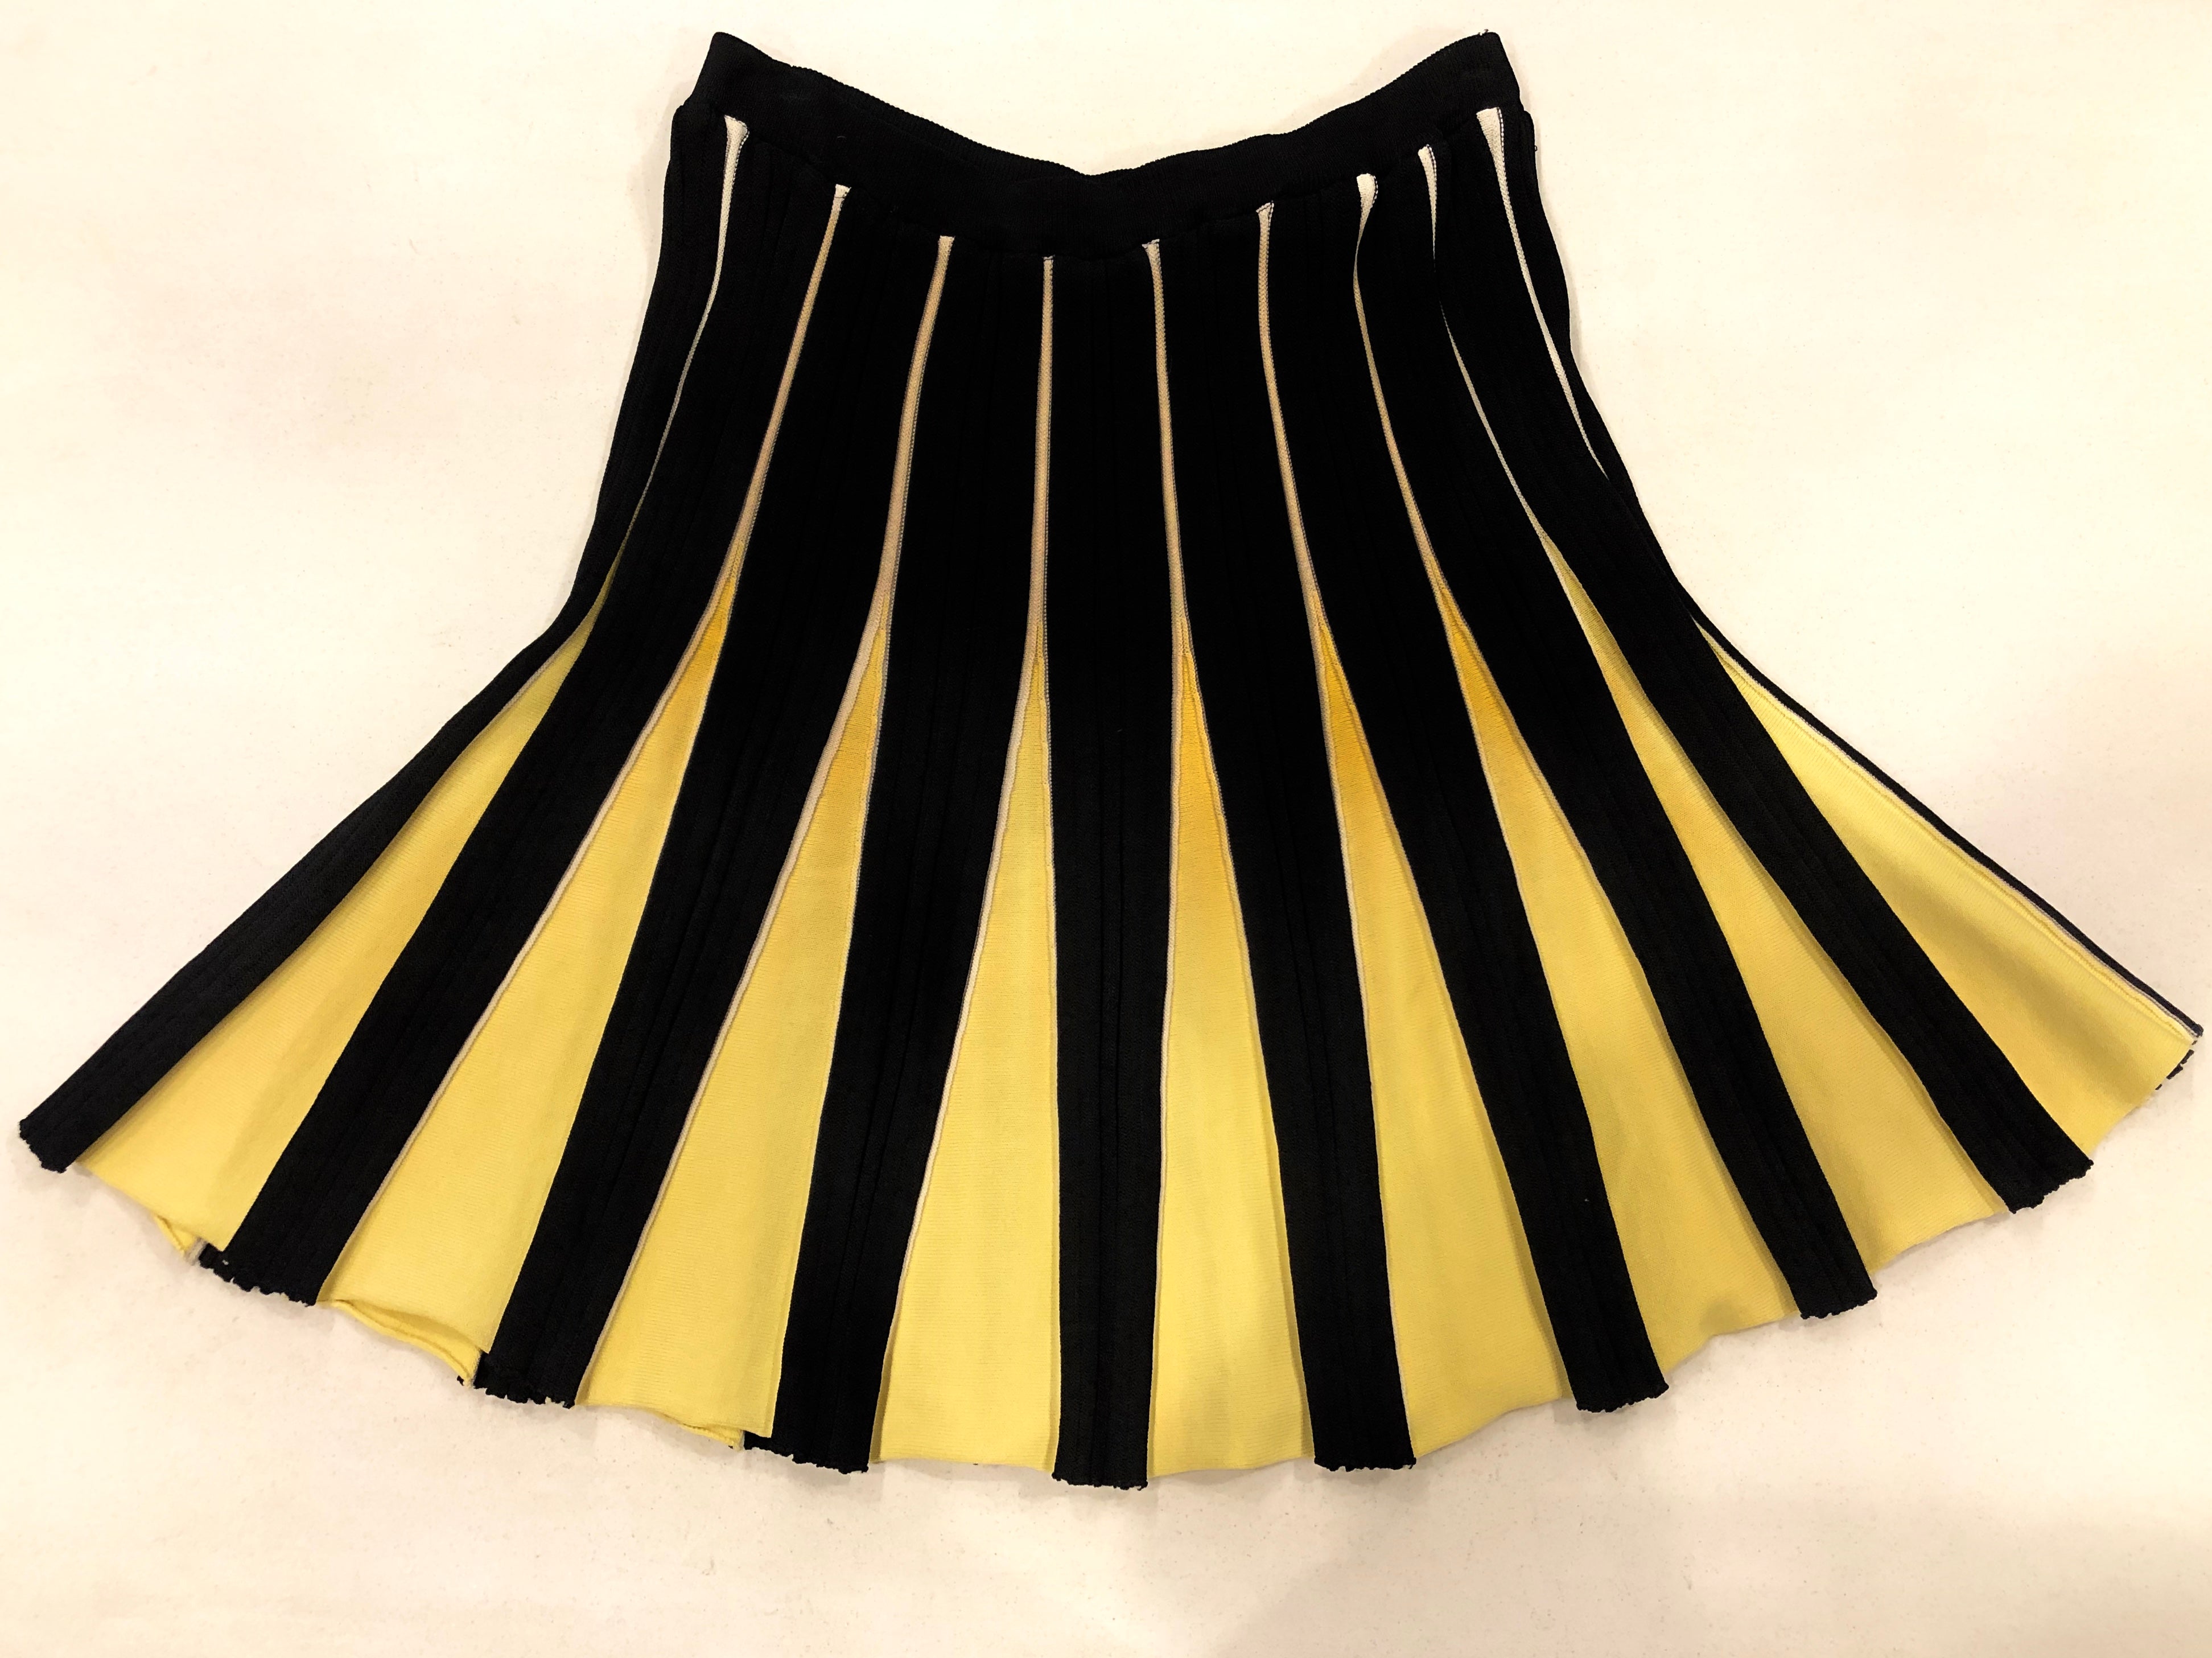 Black Knit Skirt with Yellow Godets